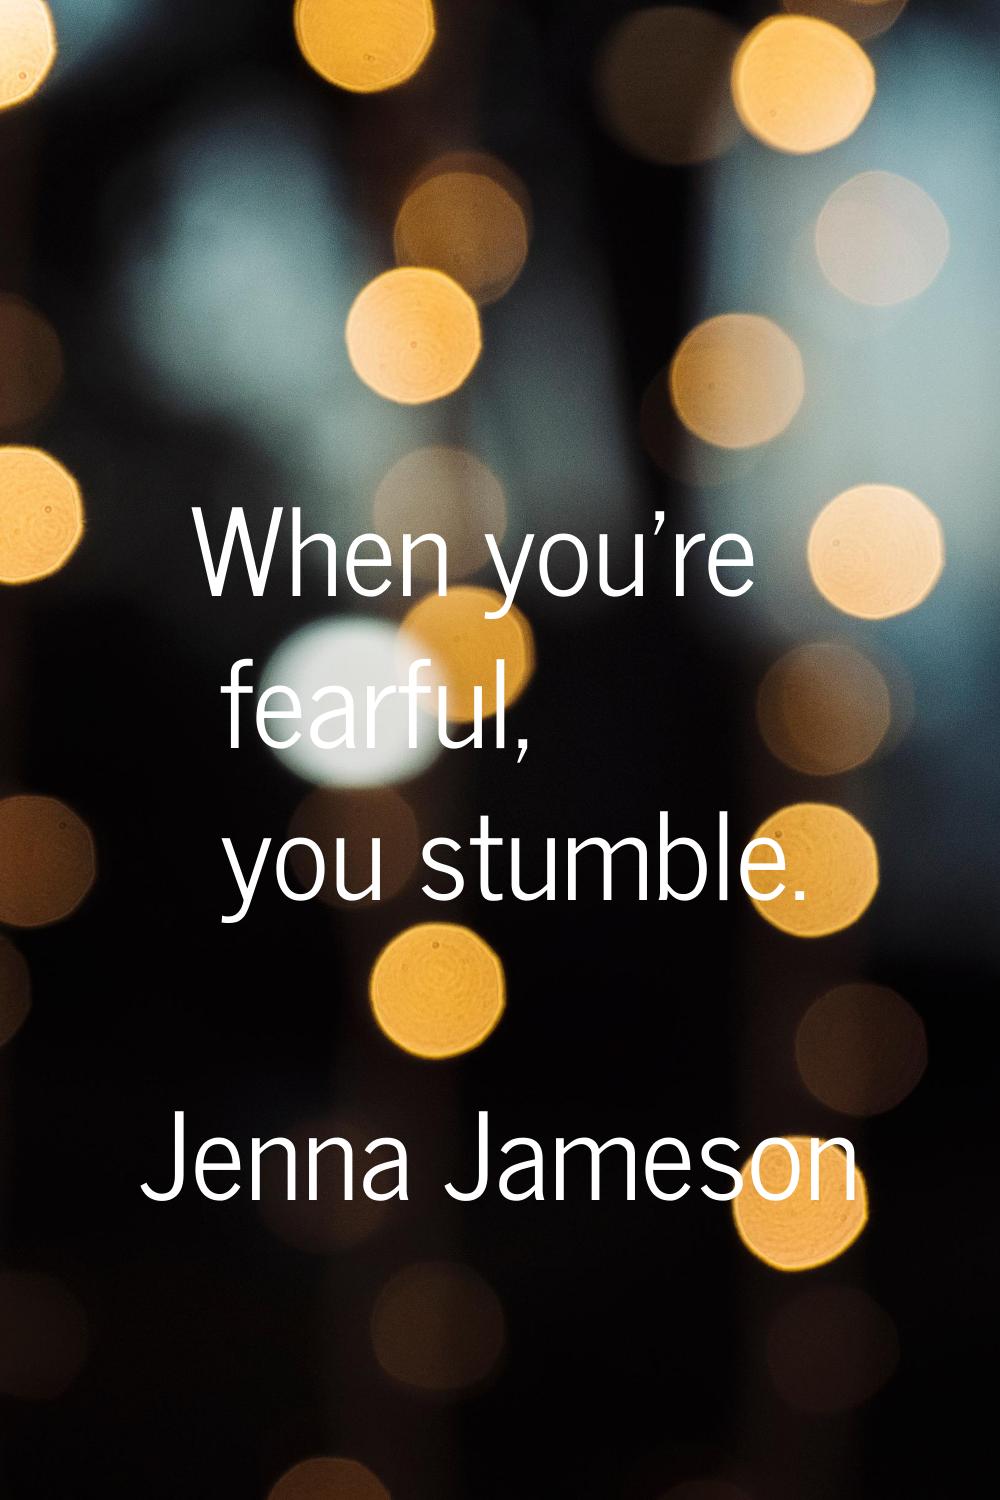 When you're fearful, you stumble.